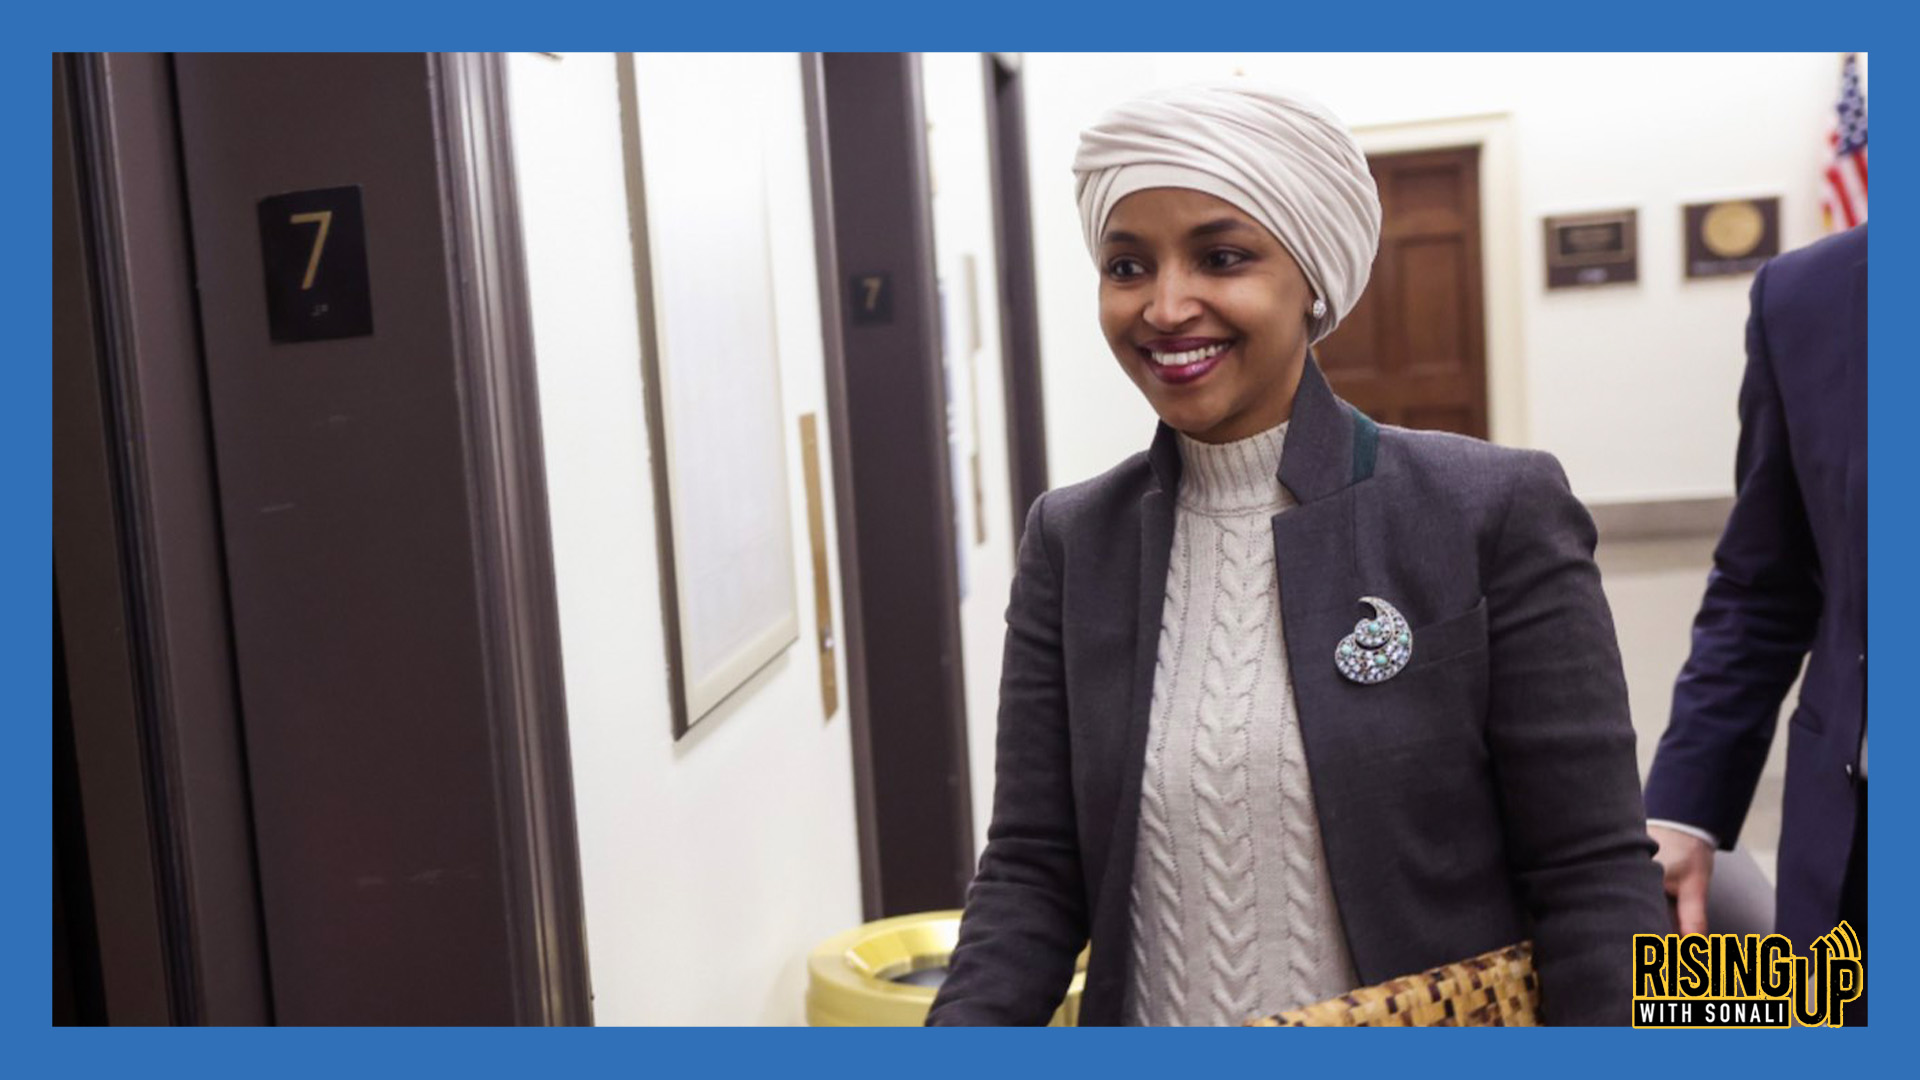 What the Attacks on Ilhan Omar Reveal?